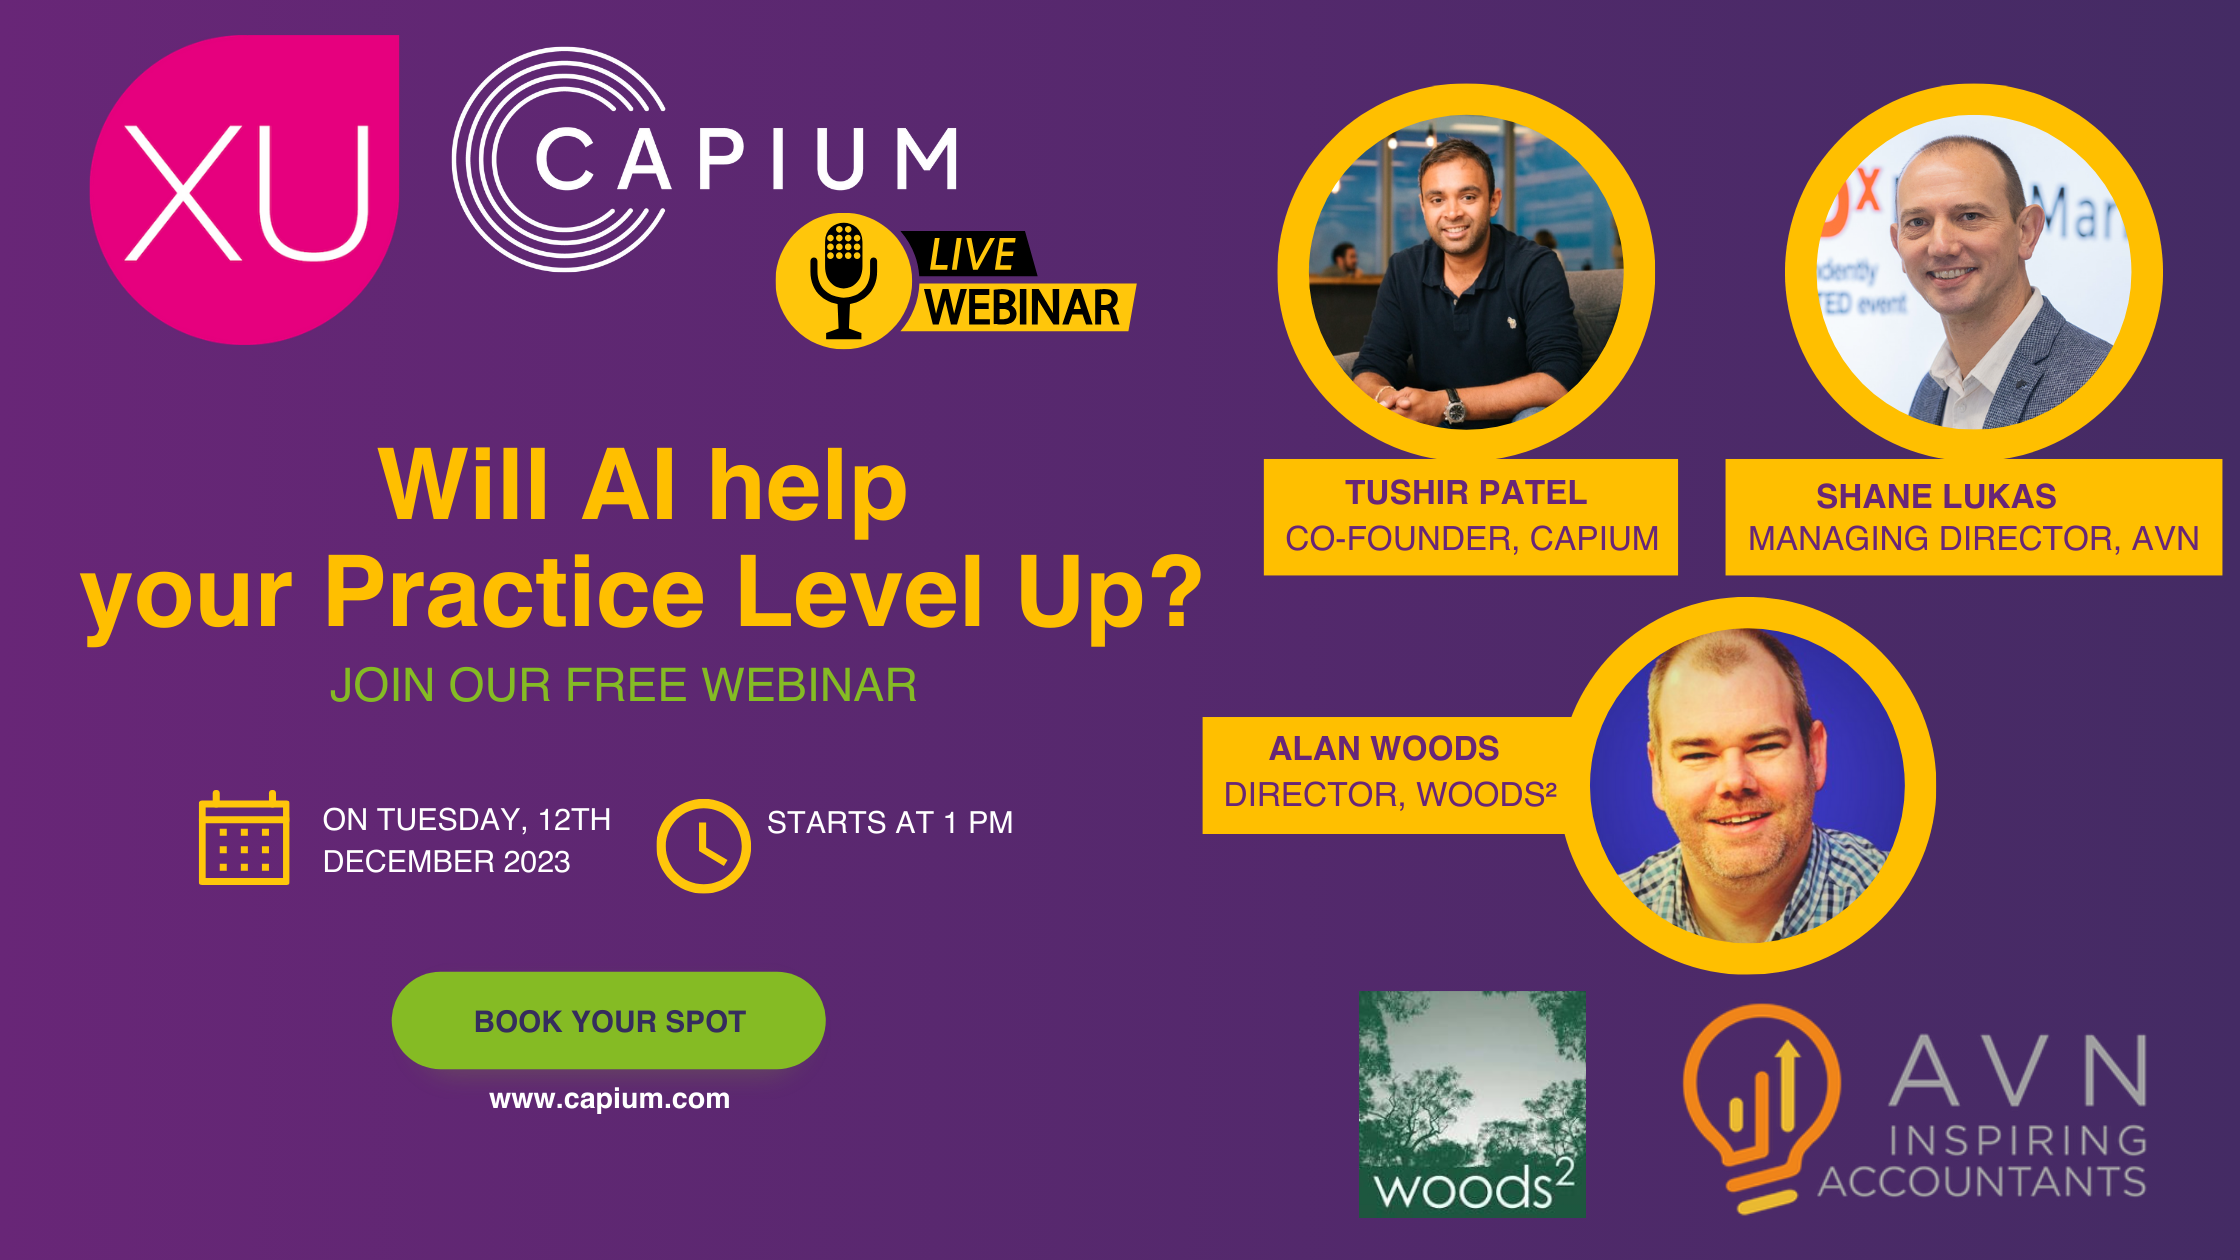 XU: Will AI help your Practice Level Up? with Capium logo